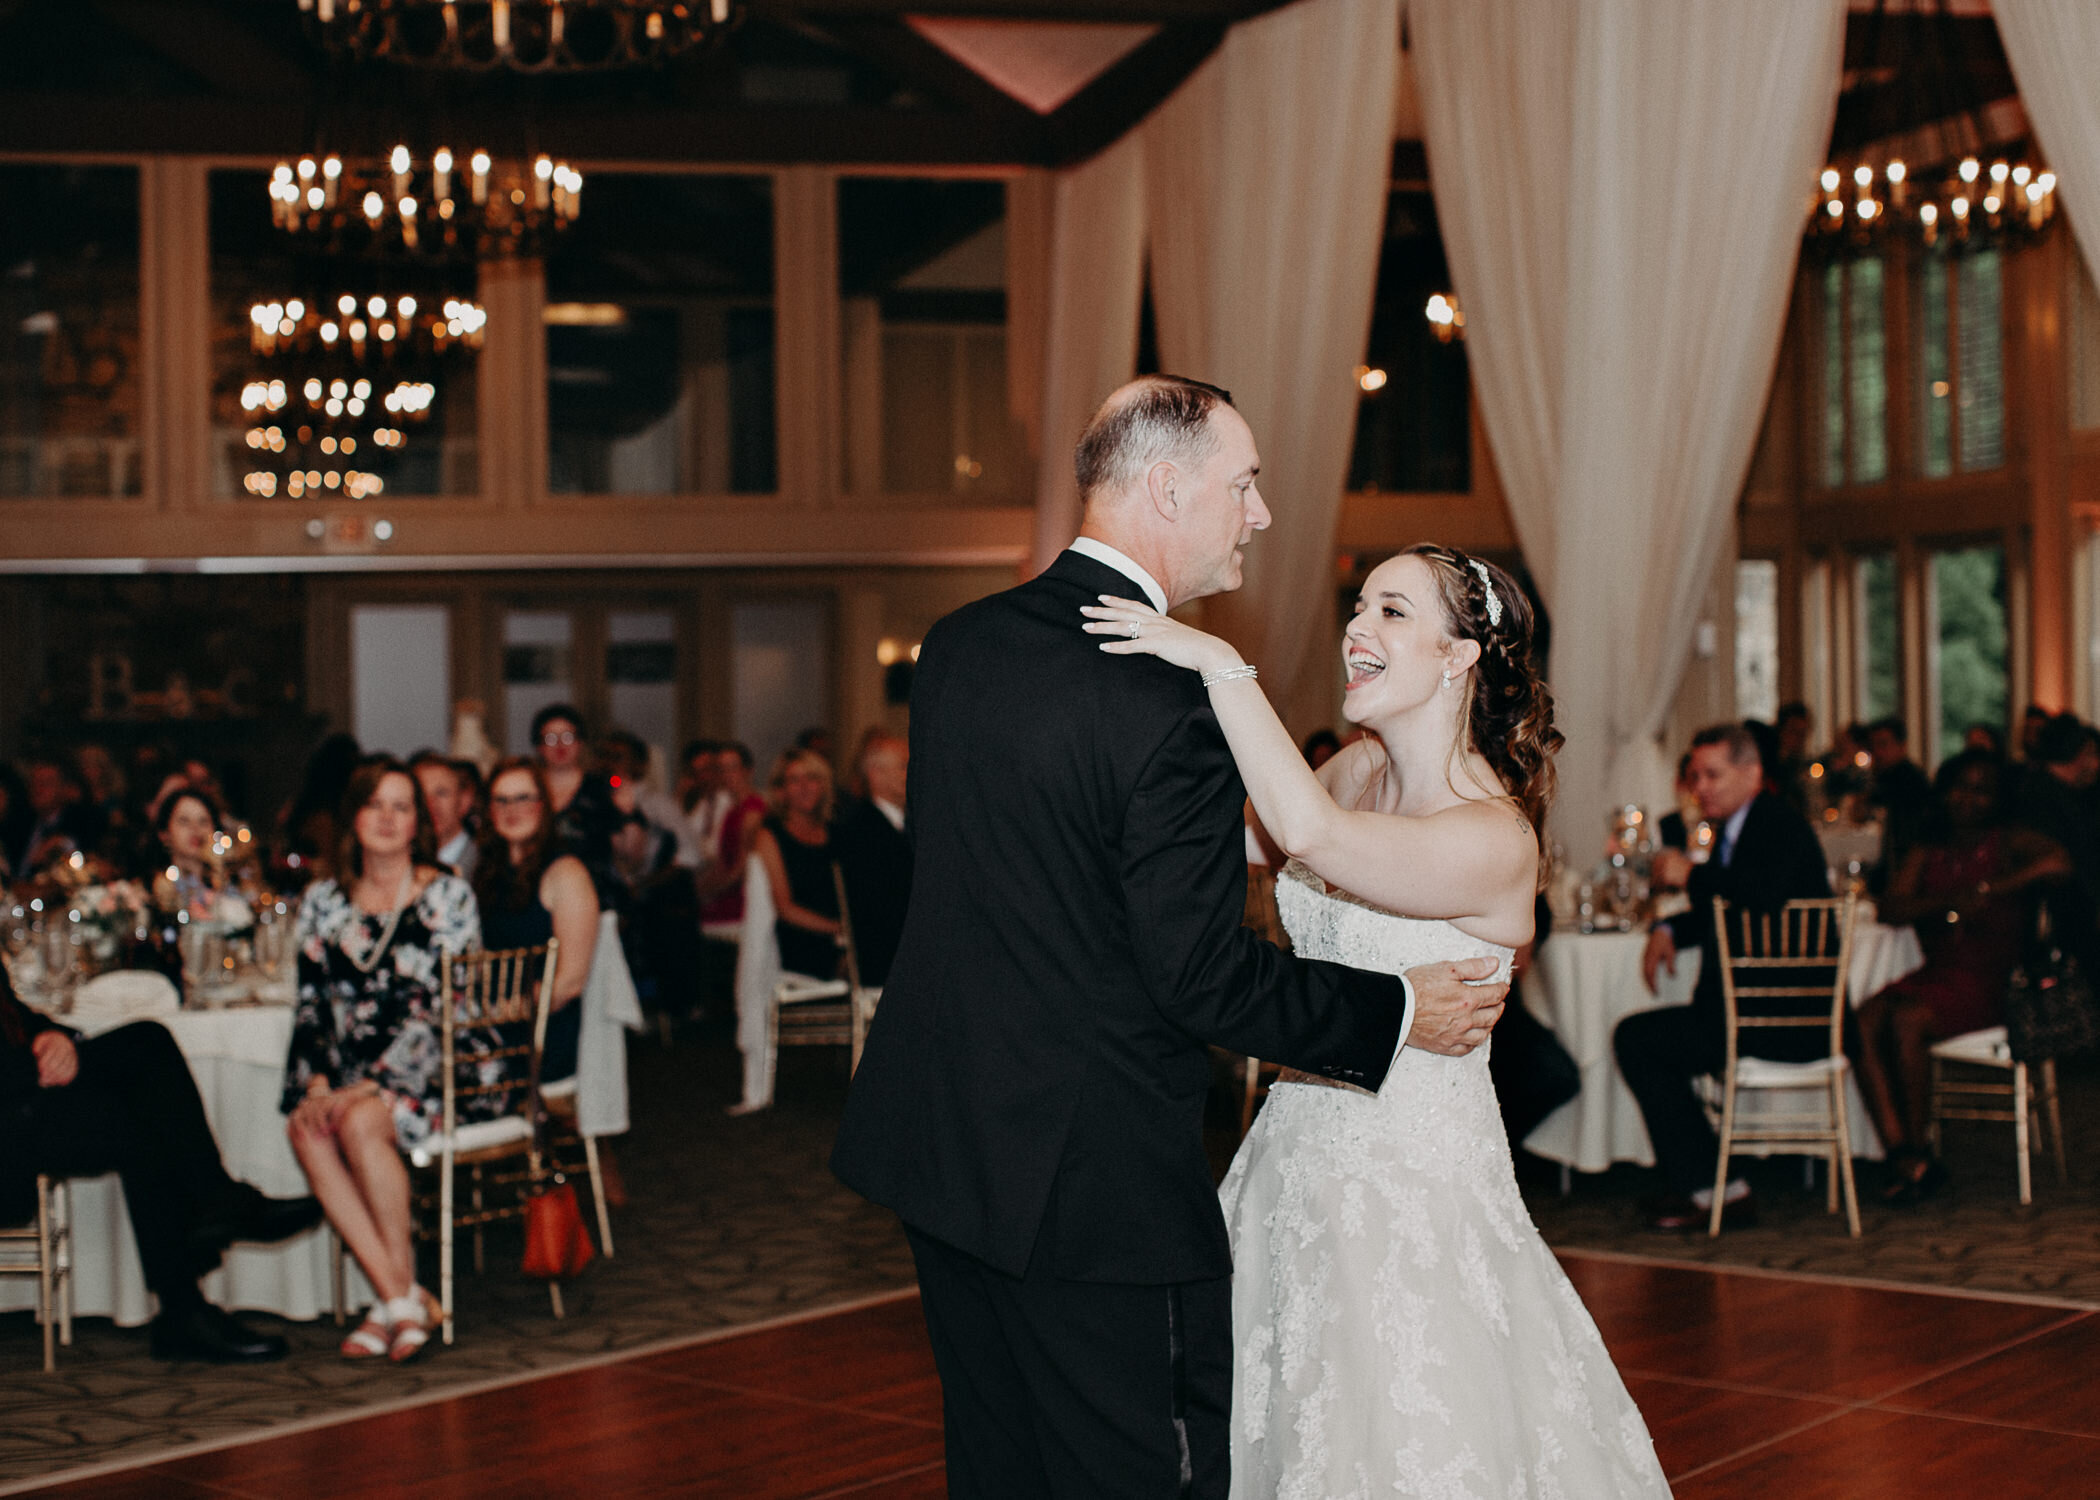 Christa & Ben's Wedding Day || Atlanta Spring Wedding at The Country Club of The South65.jpg